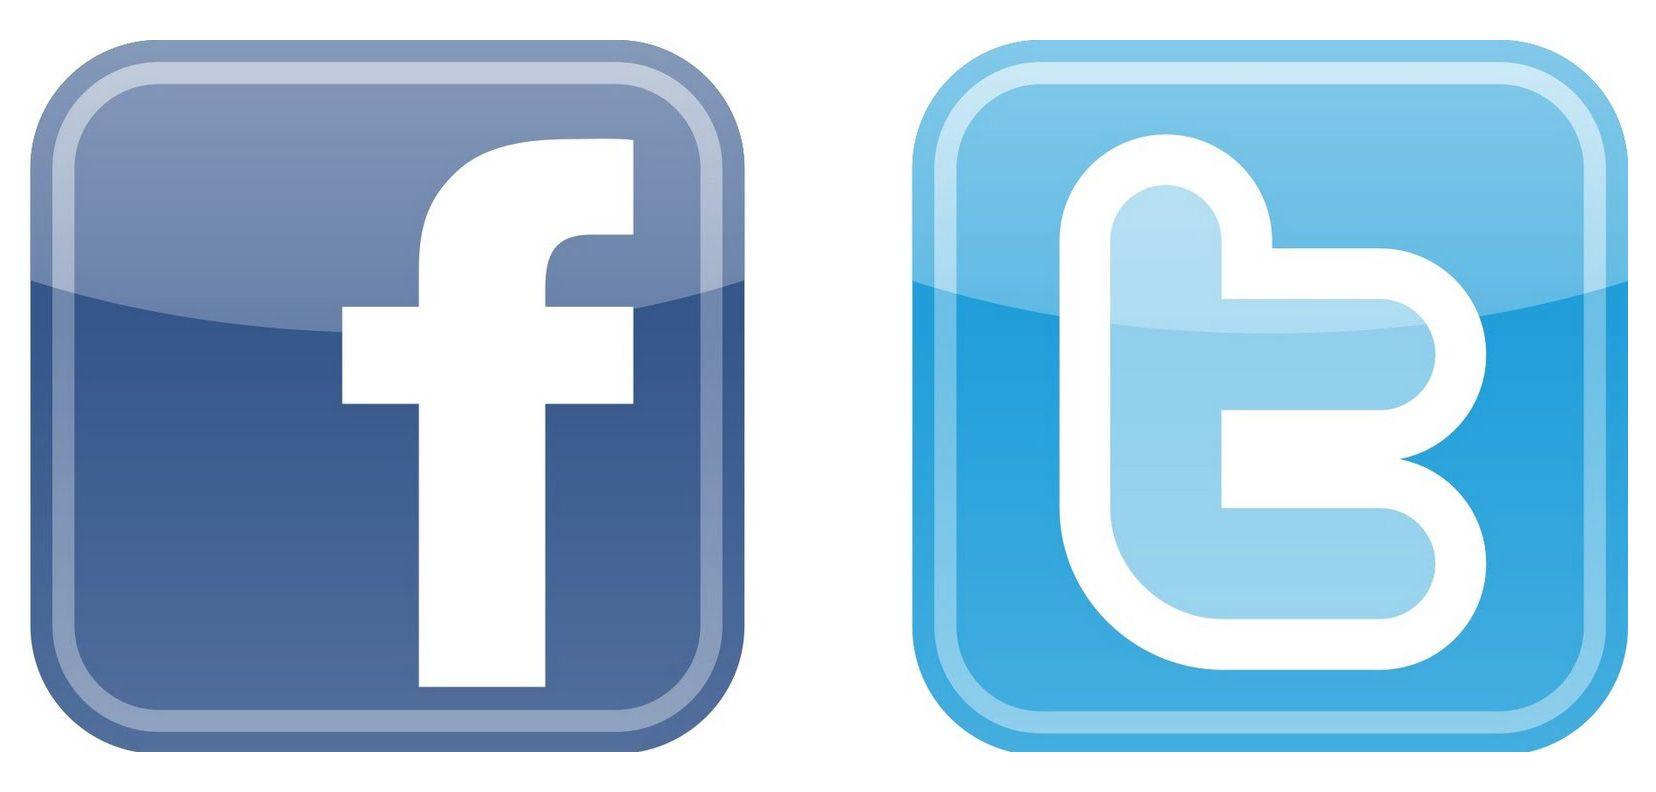 Official Small Facebook Logo - Free Small Fb Icon 41629. Download Small Fb Icon